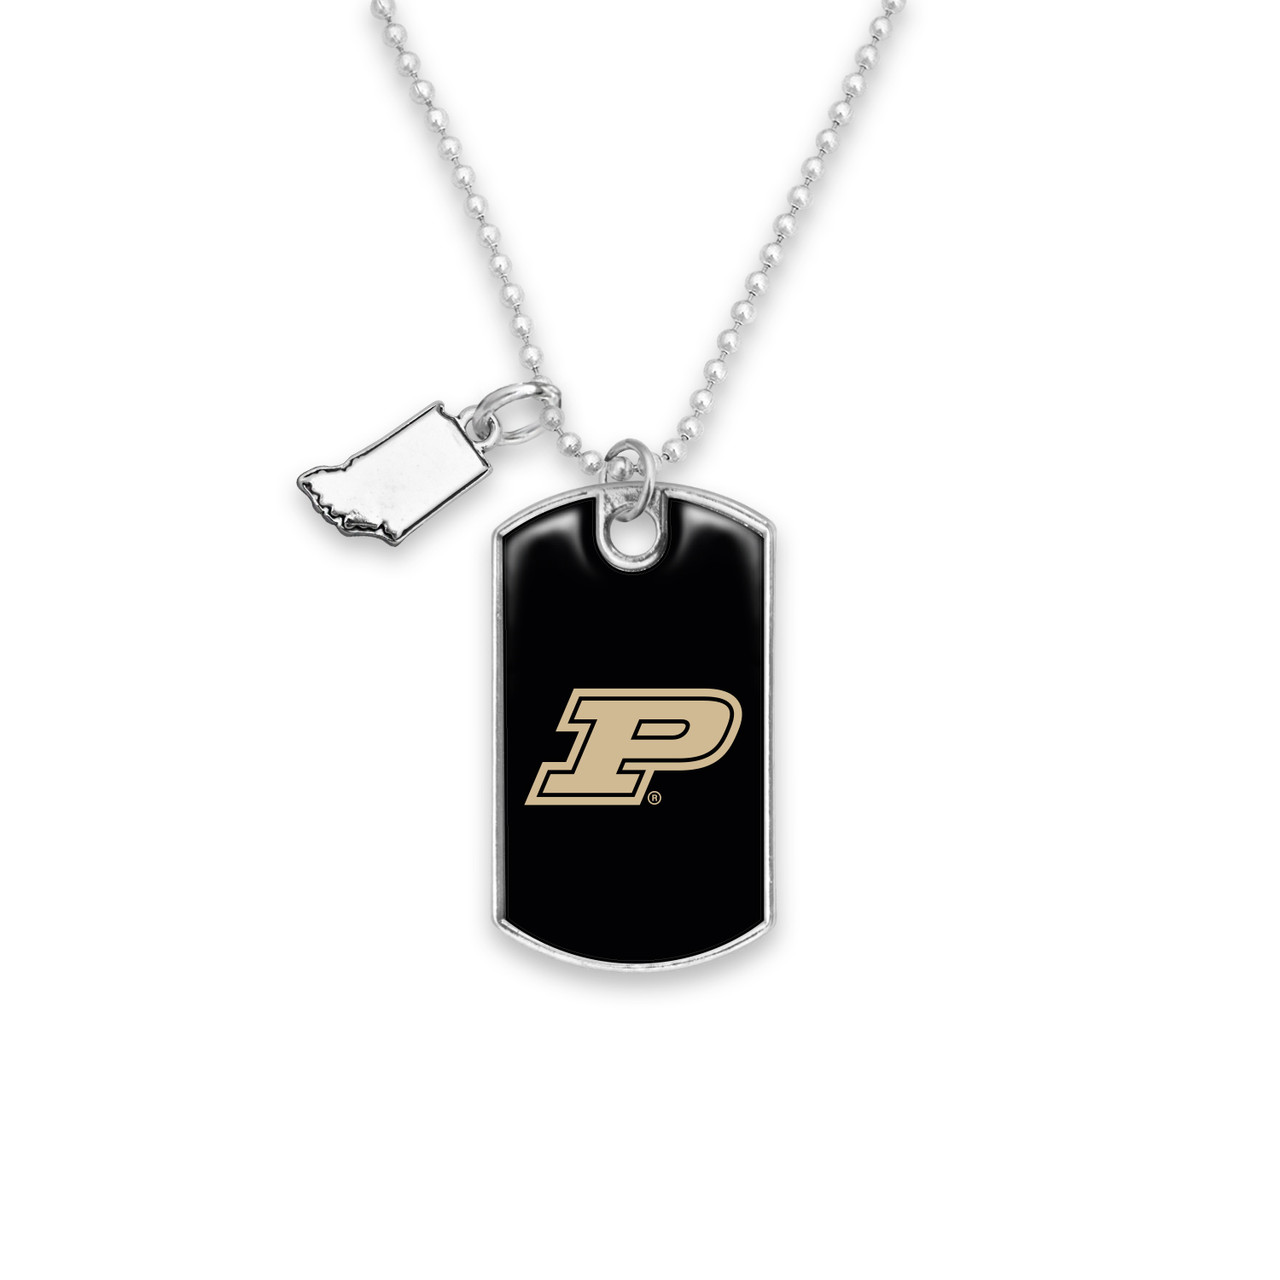 Purdue Boilermakers Car Charm- Rear View Mirror Dog Tag with State Charm